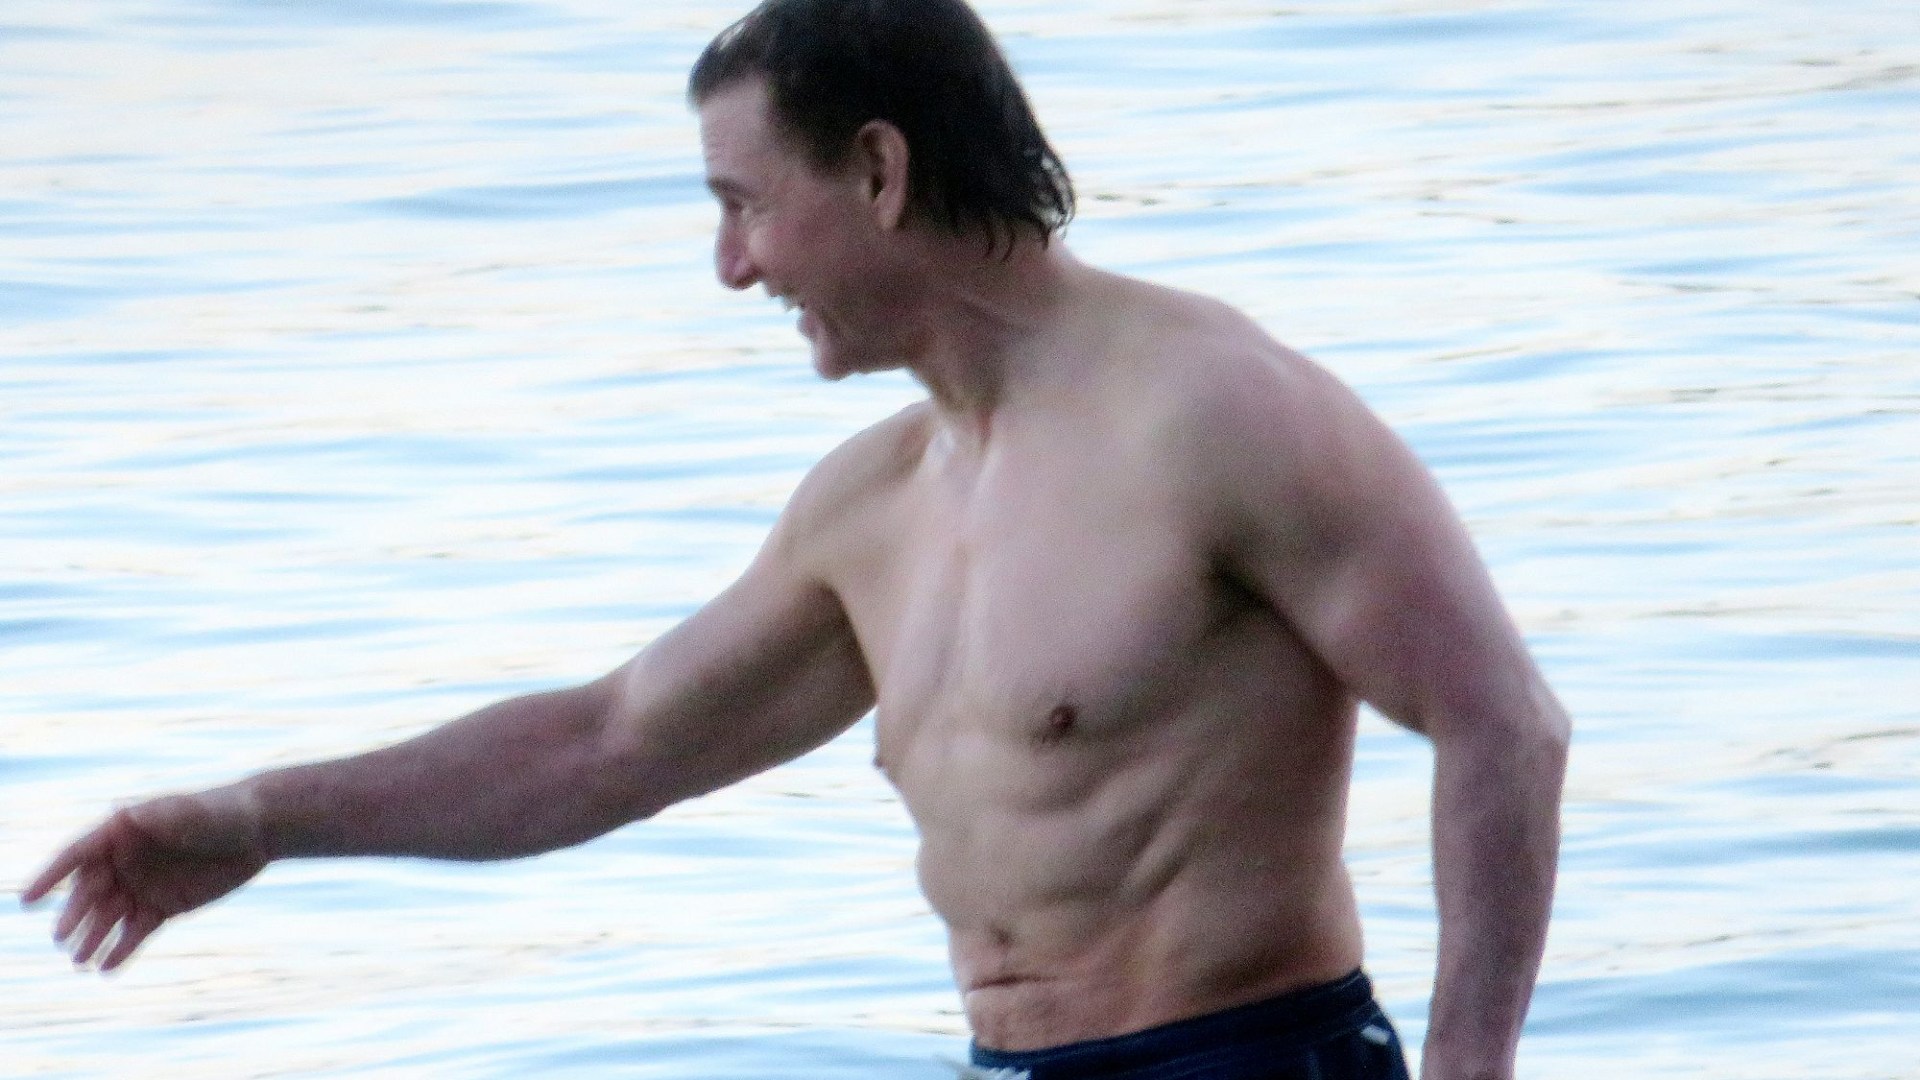 Tom Cruise, 61, looks amazing as he shows off ripped body on the beach 38 years after THAT iconic Top Gun scene [Video]